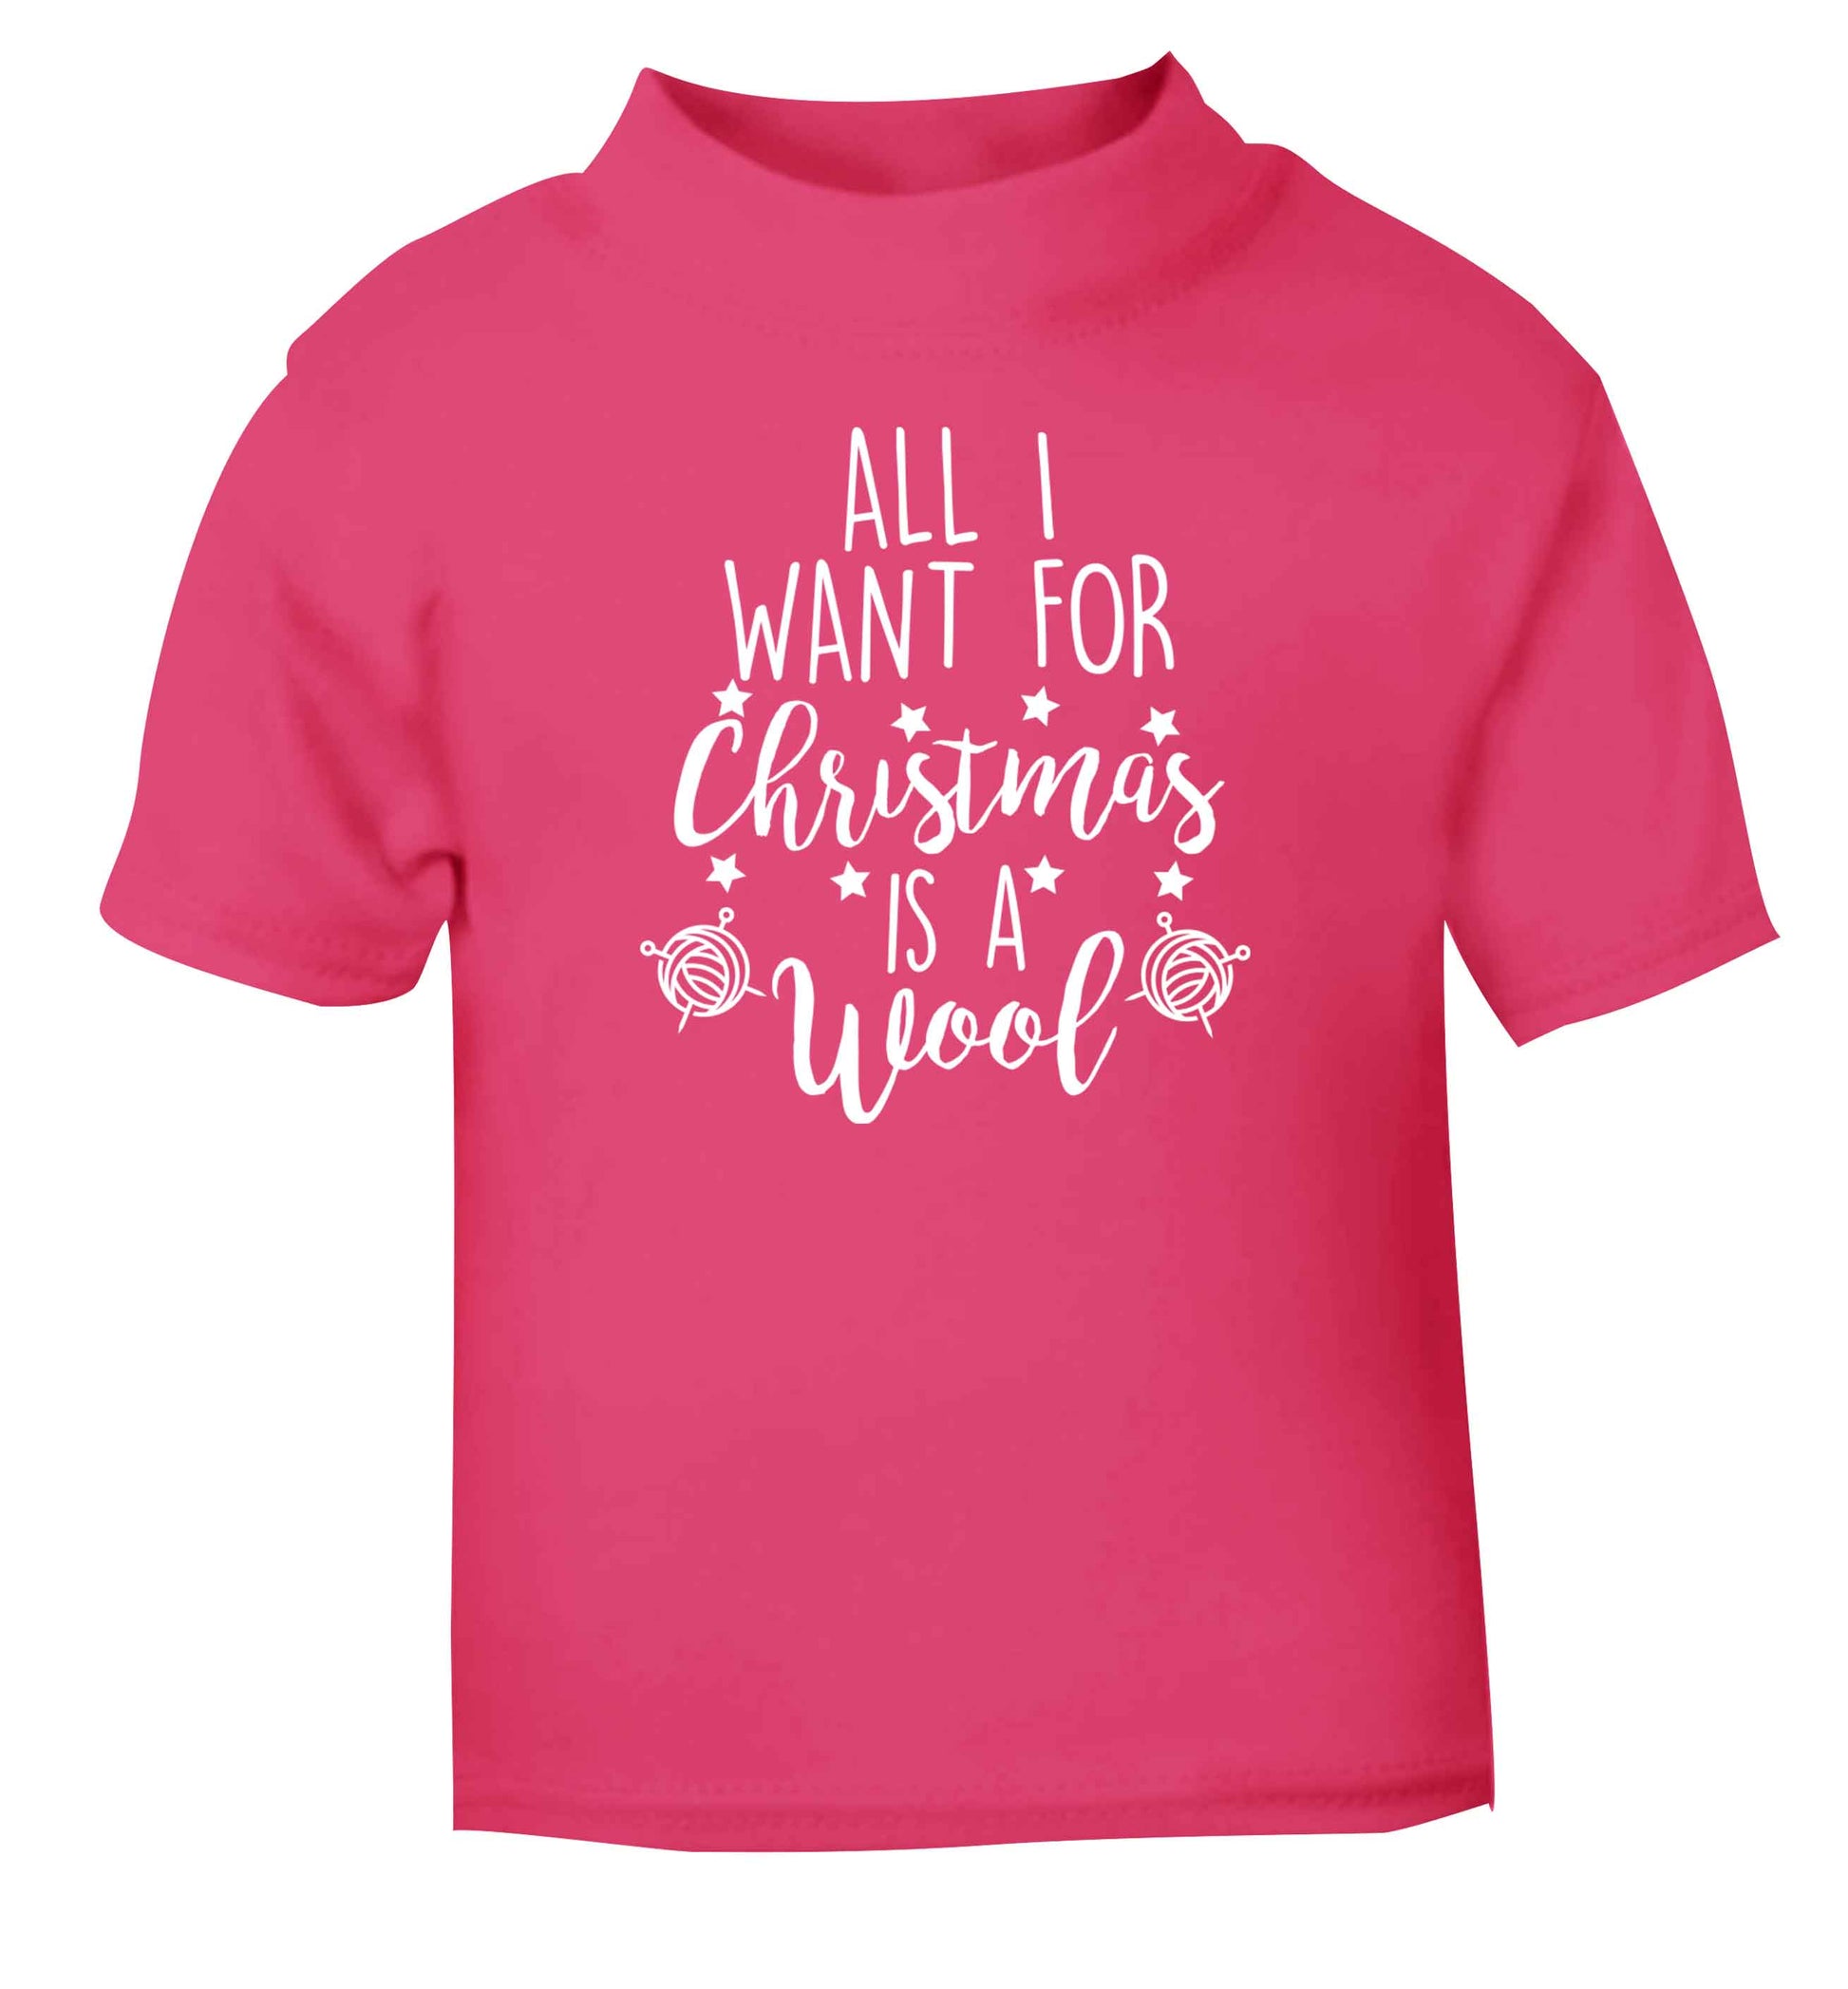 All I want for Christmas is wool! pink Baby Toddler Tshirt 2 Years